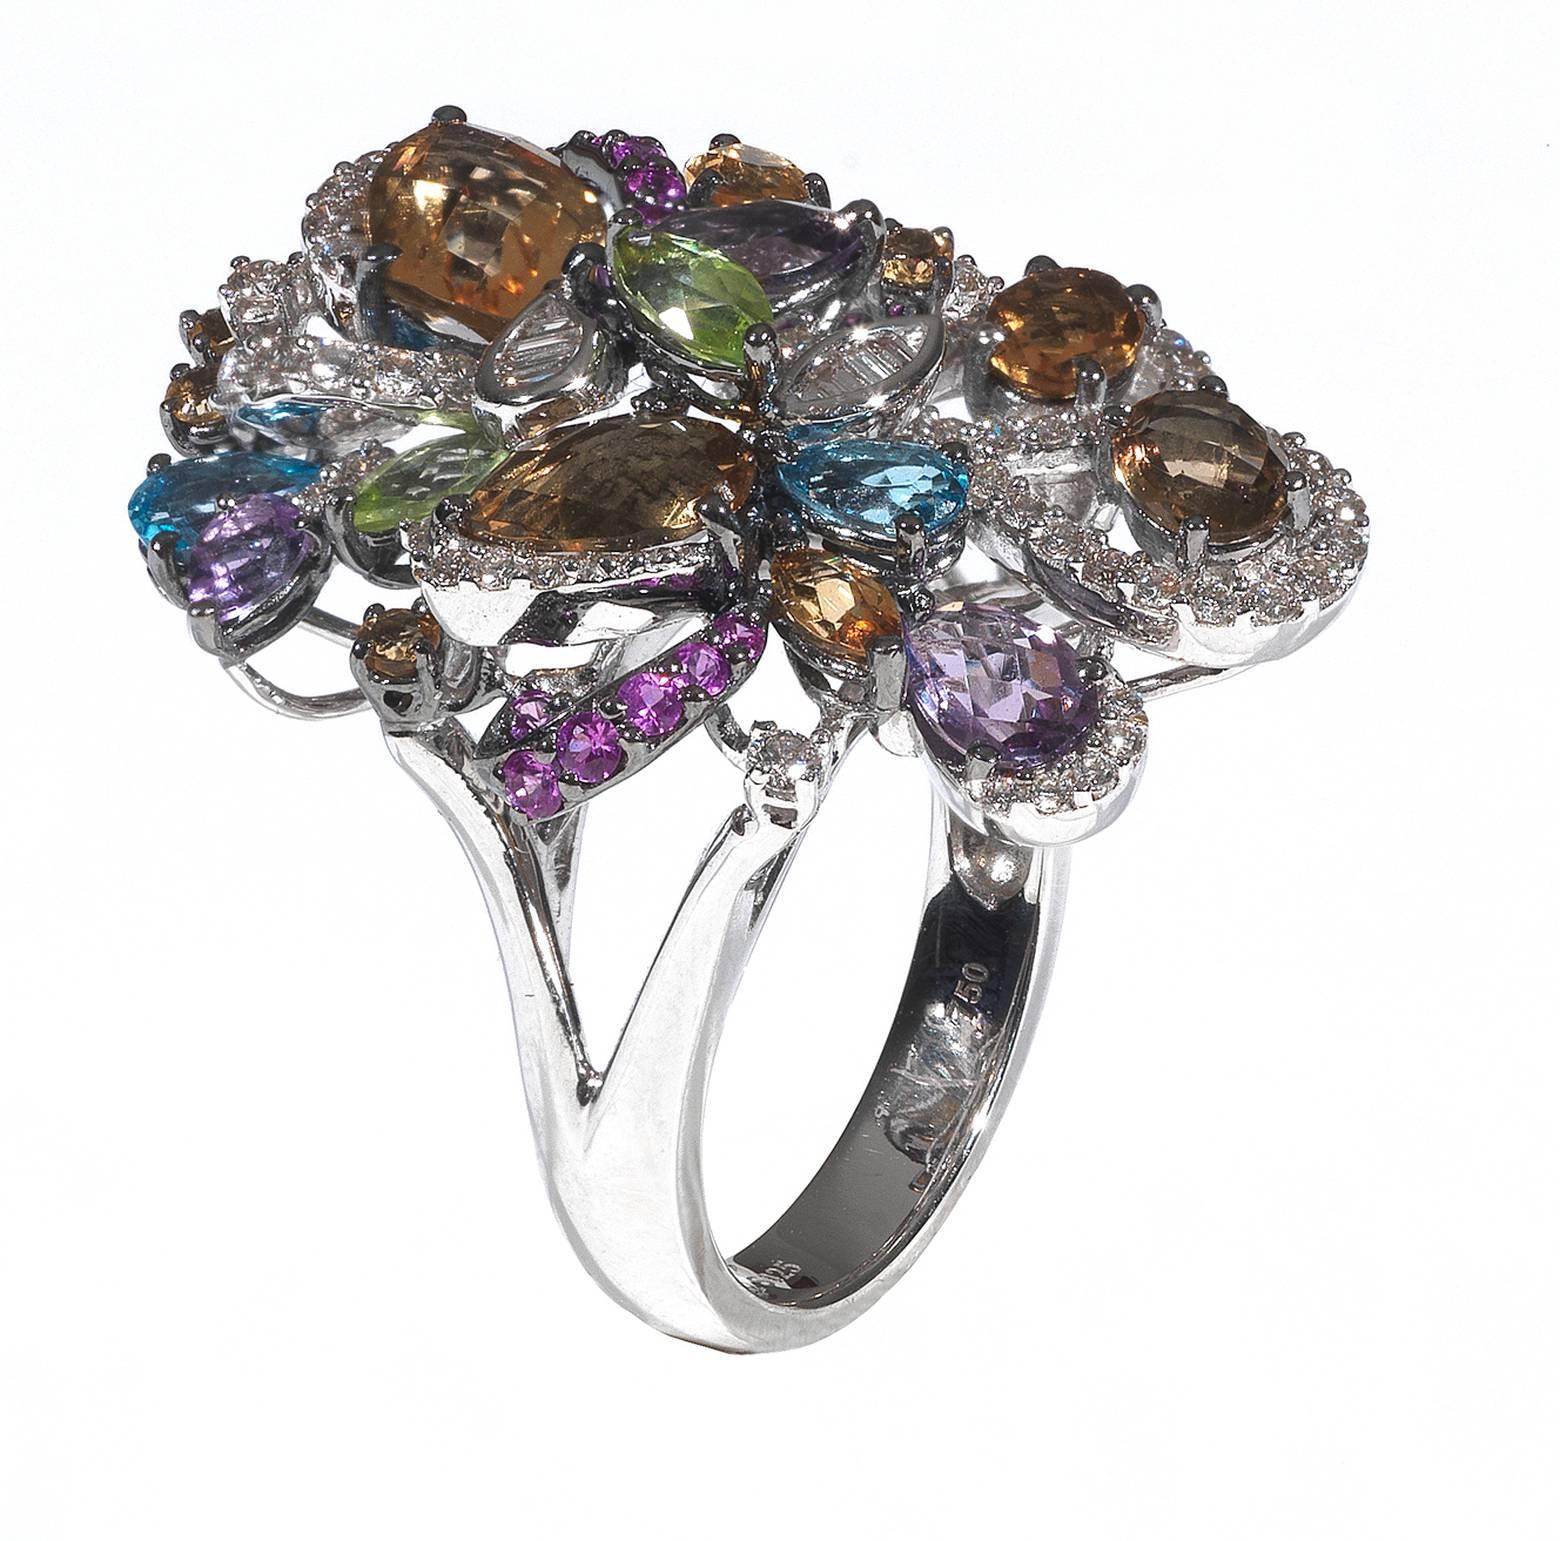 Designed as a floral bouquet with various cuts and colors topazes including oval, drop and round cuts; citrine, green, blu and pink colors; drop and marquise cut amethysts.

Accented by round and baguette cut diamonds

Mounted in 18Kt white